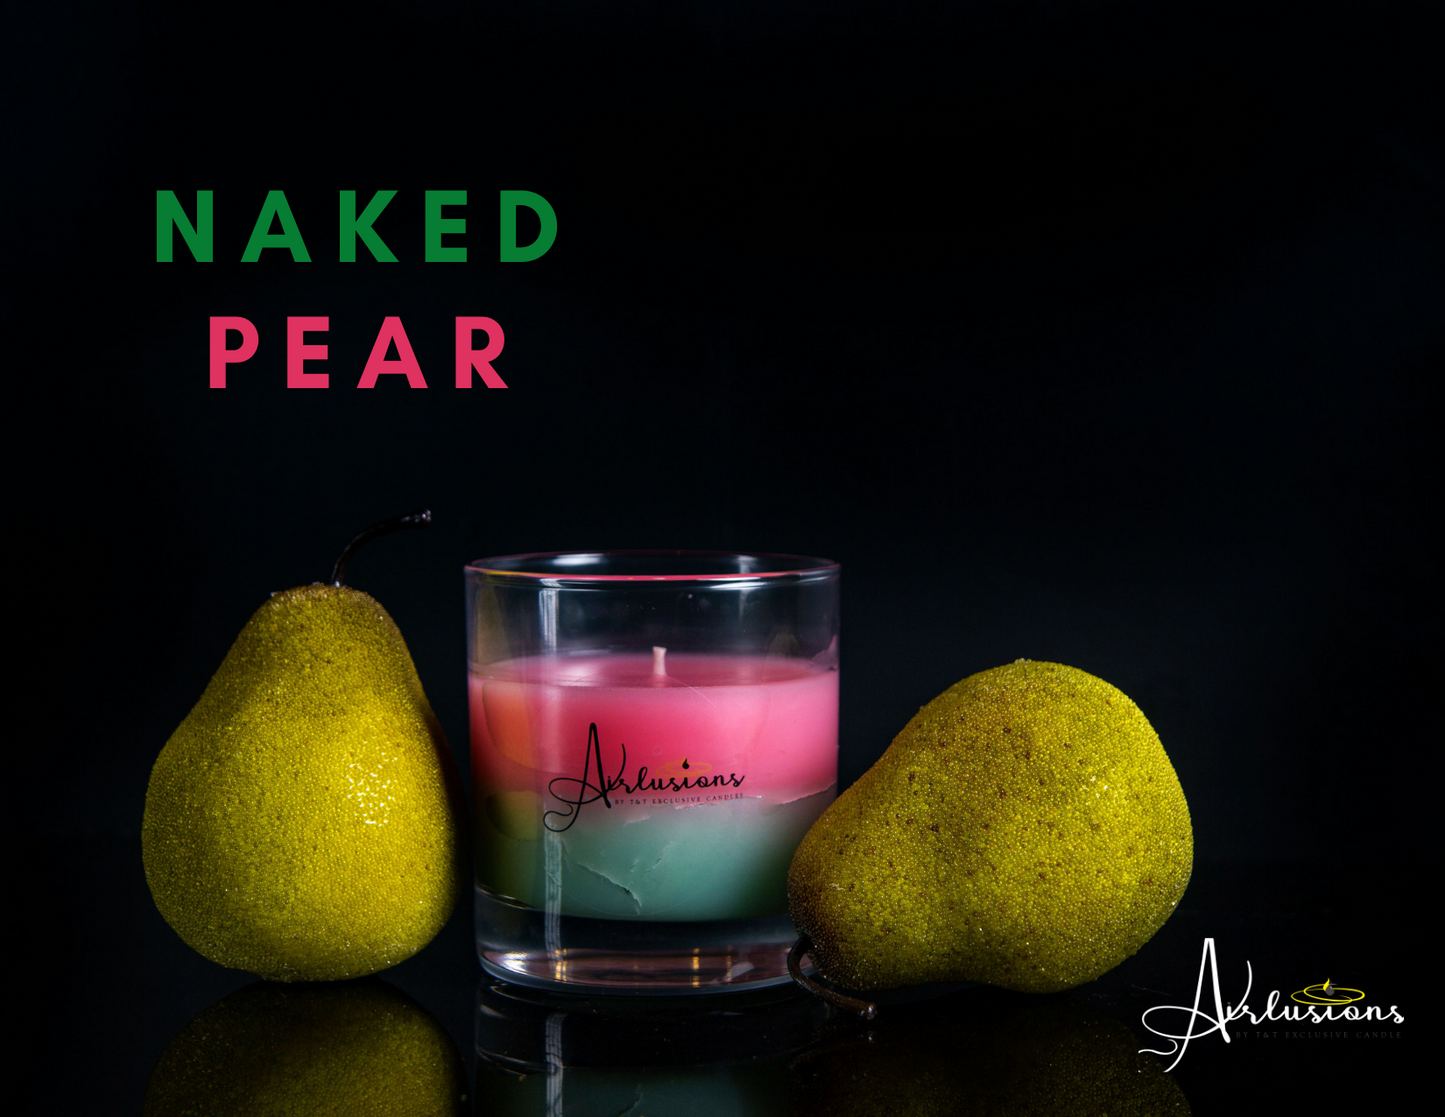 Naked Pear